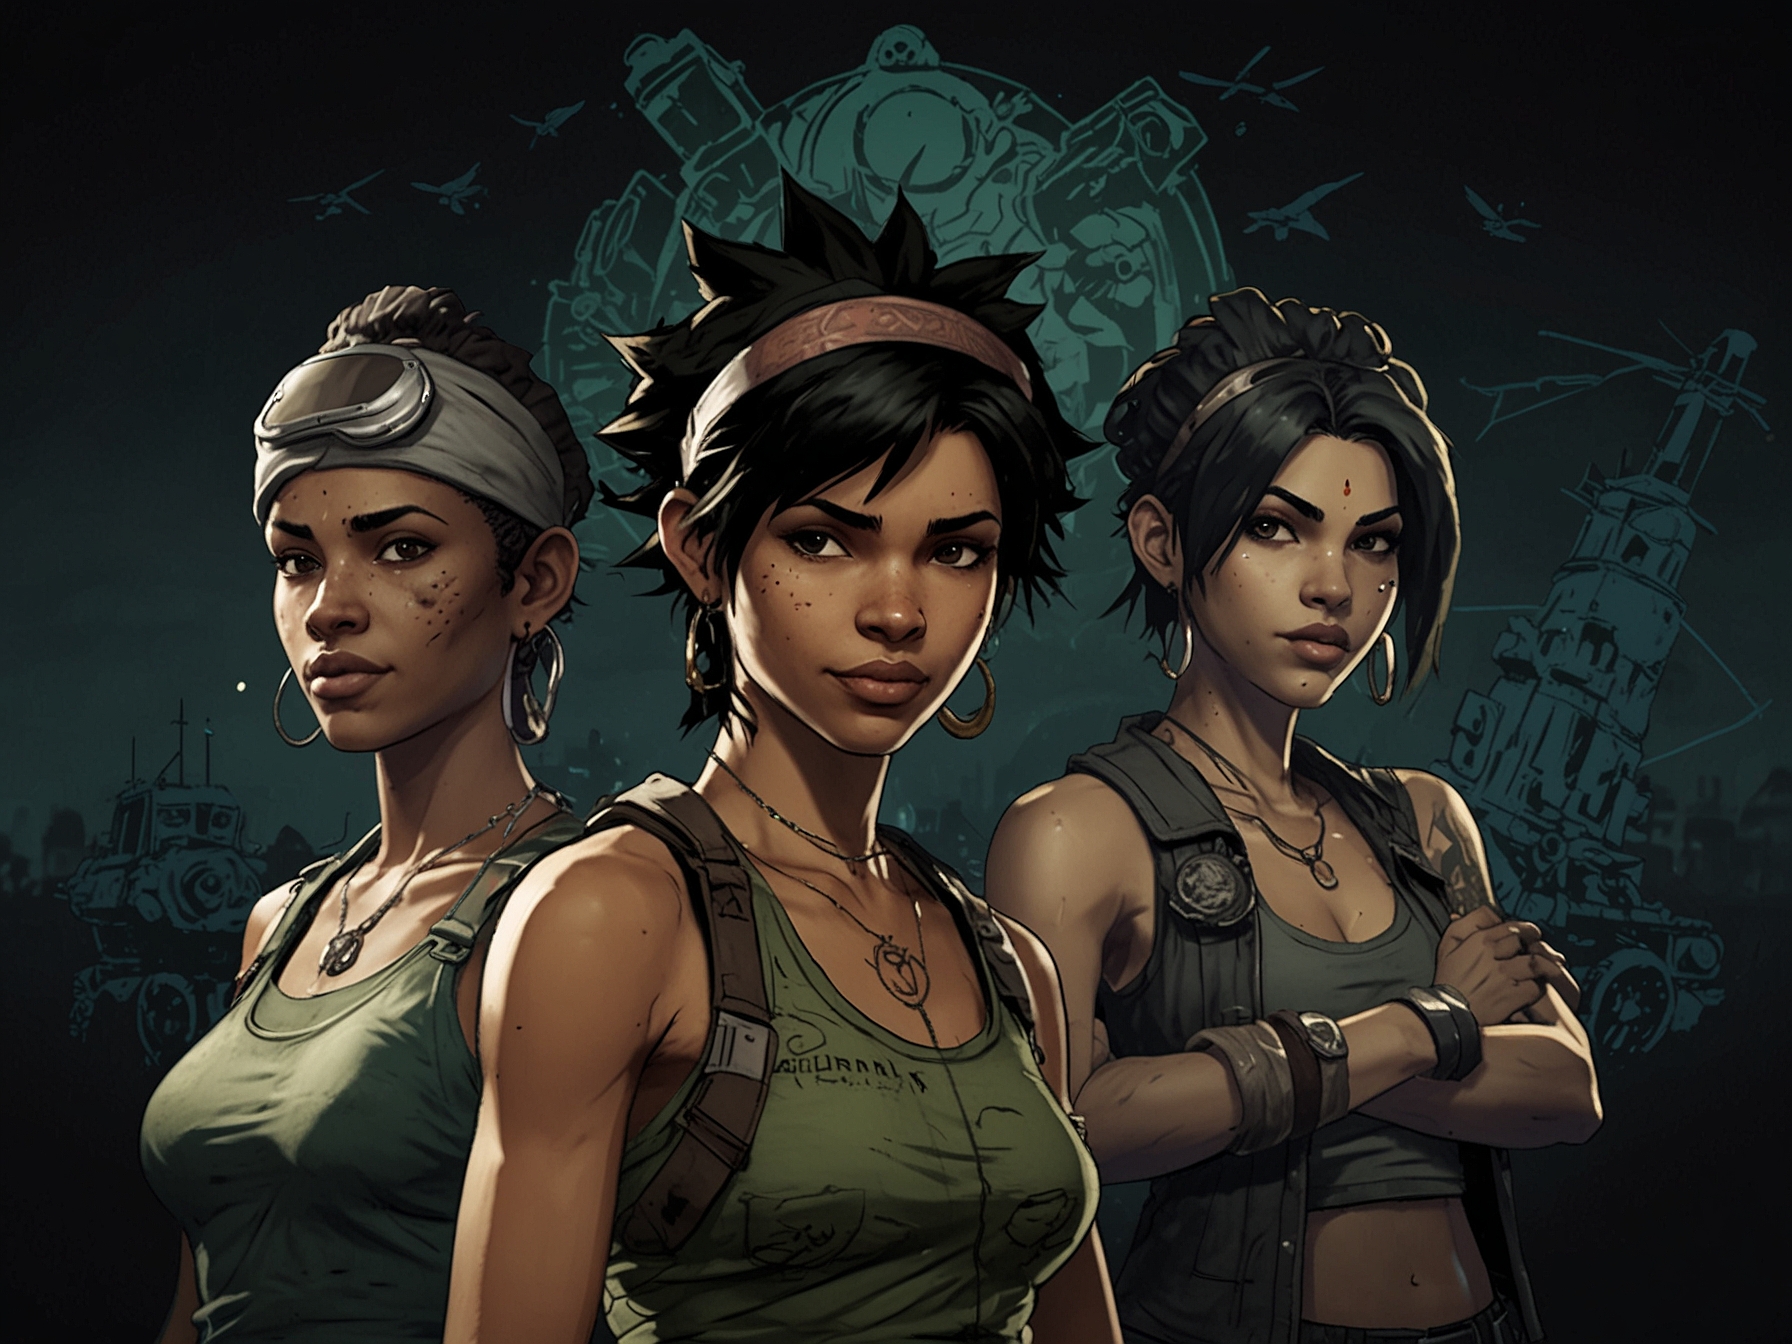 A screenshot from the Beyond Good & Evil 20th Anniversary Edition trailer, showcasing the updated character models and enhanced graphics that pay tribute to the original 2003 game.